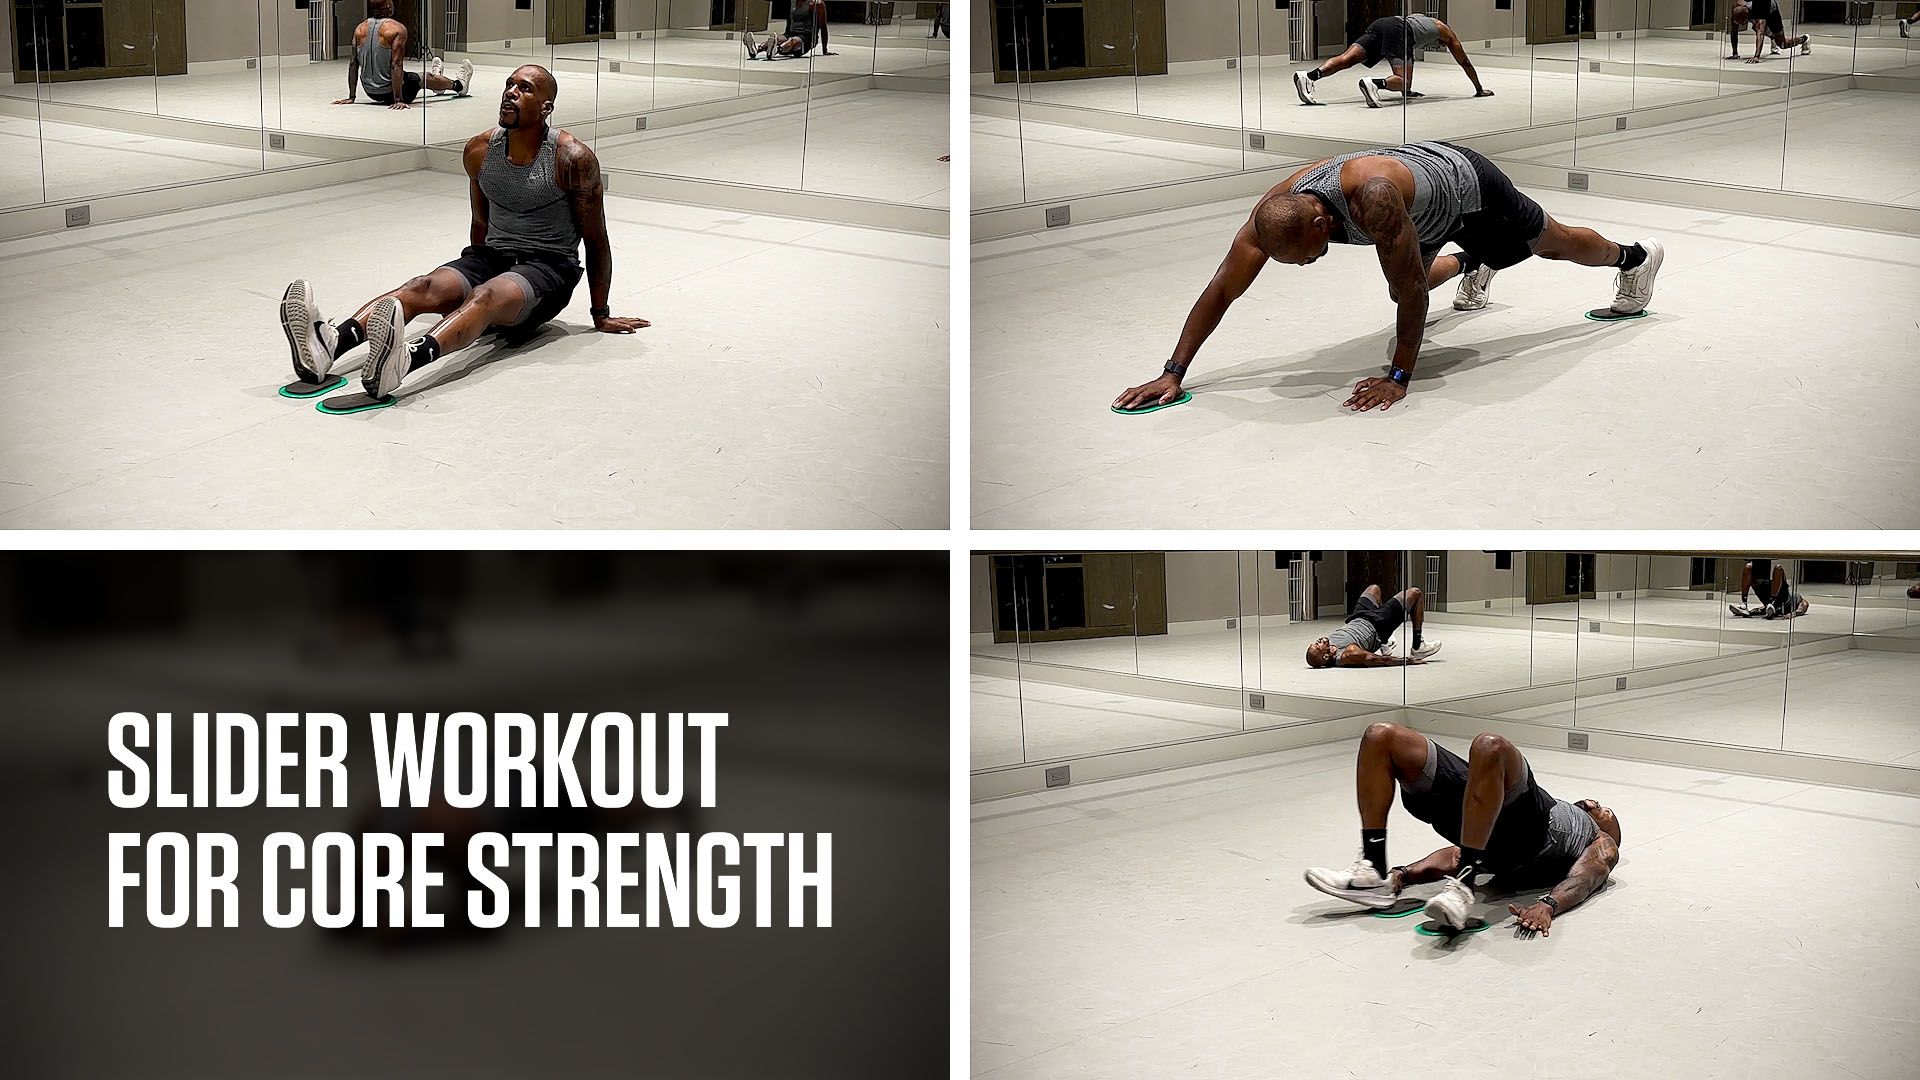 Training with core sliders: 11 effective exercises